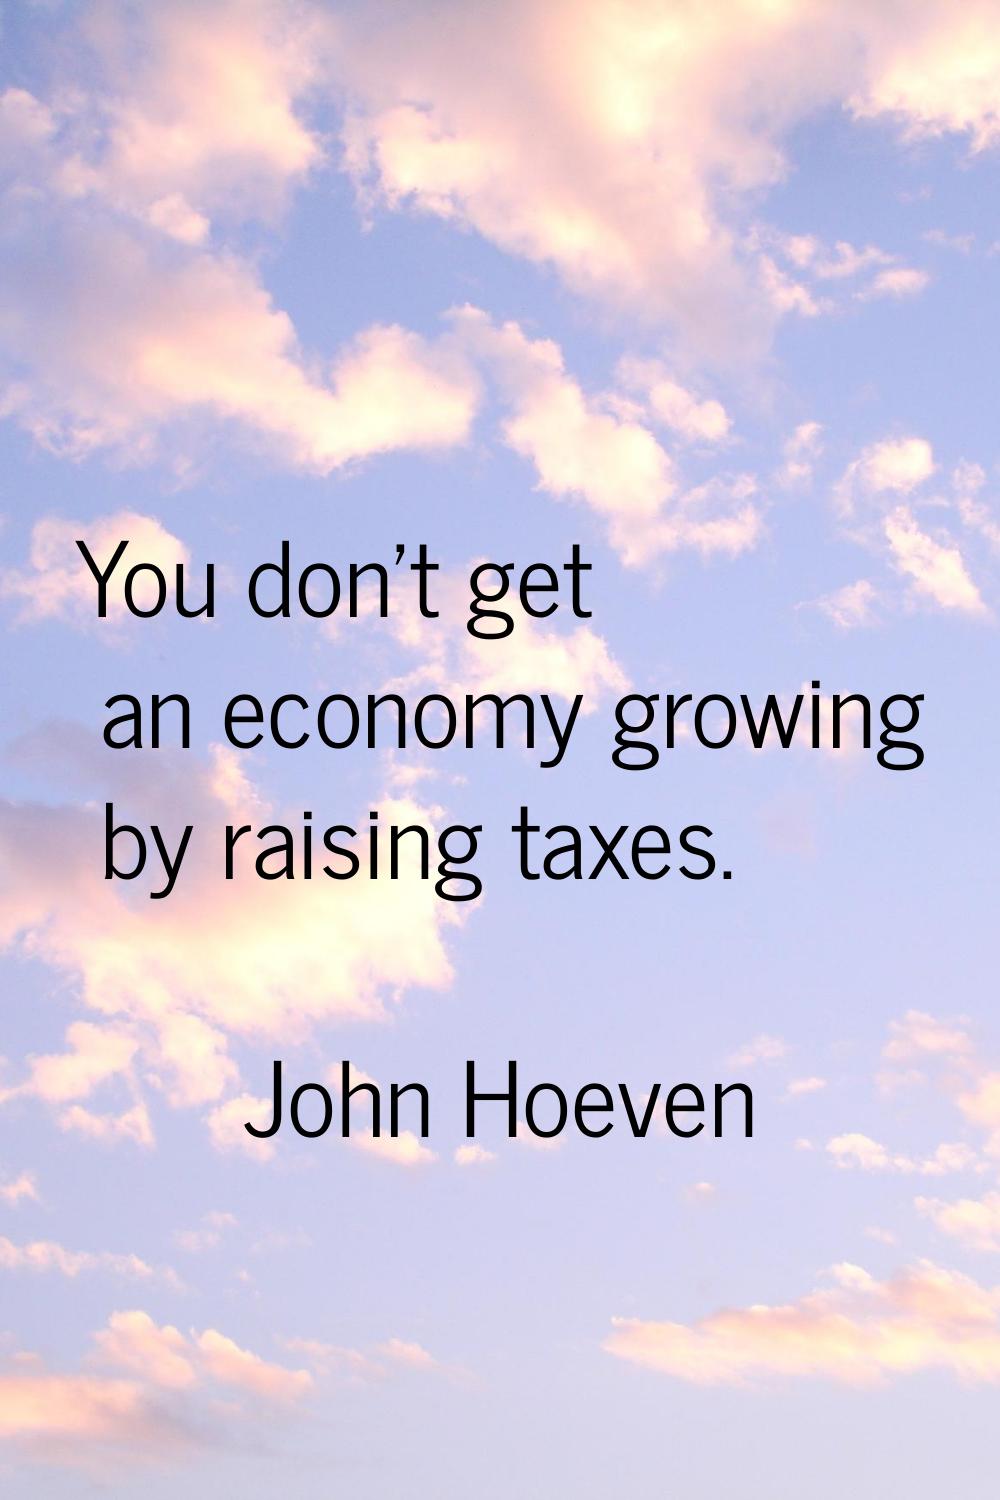 You don't get an economy growing by raising taxes.